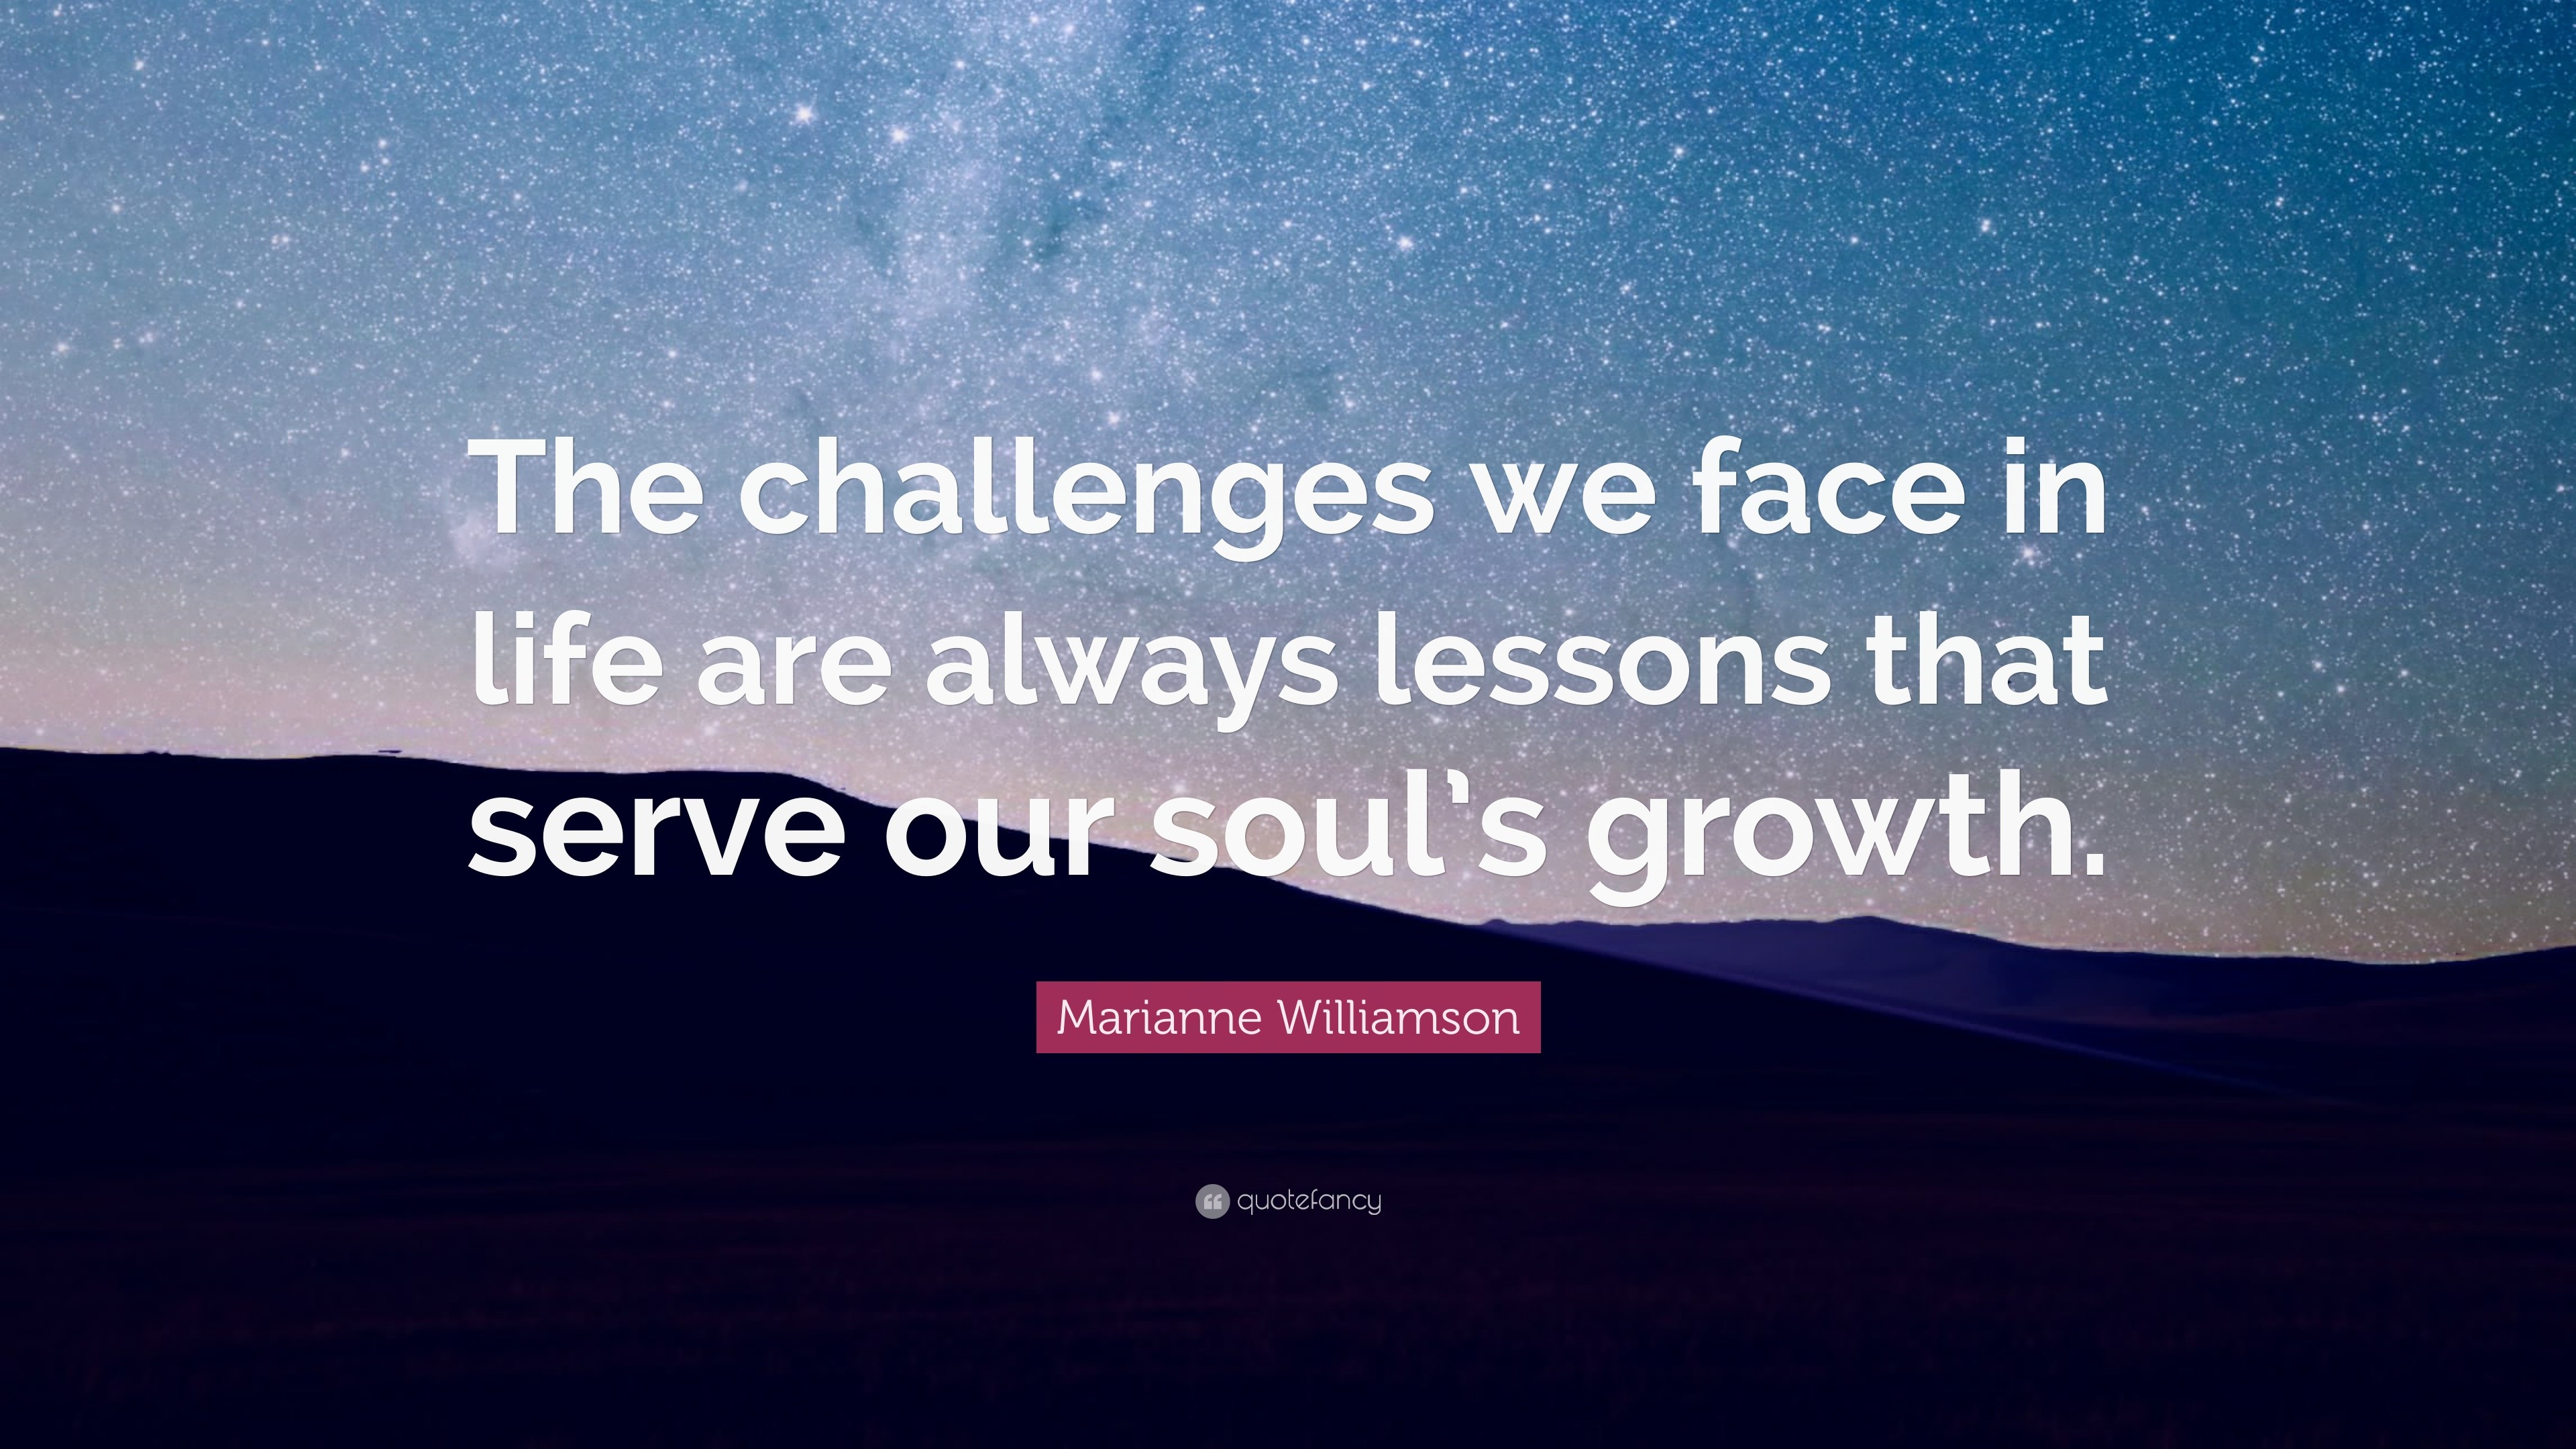 Marianne Williamson Quote: “The challenges we face in life are always